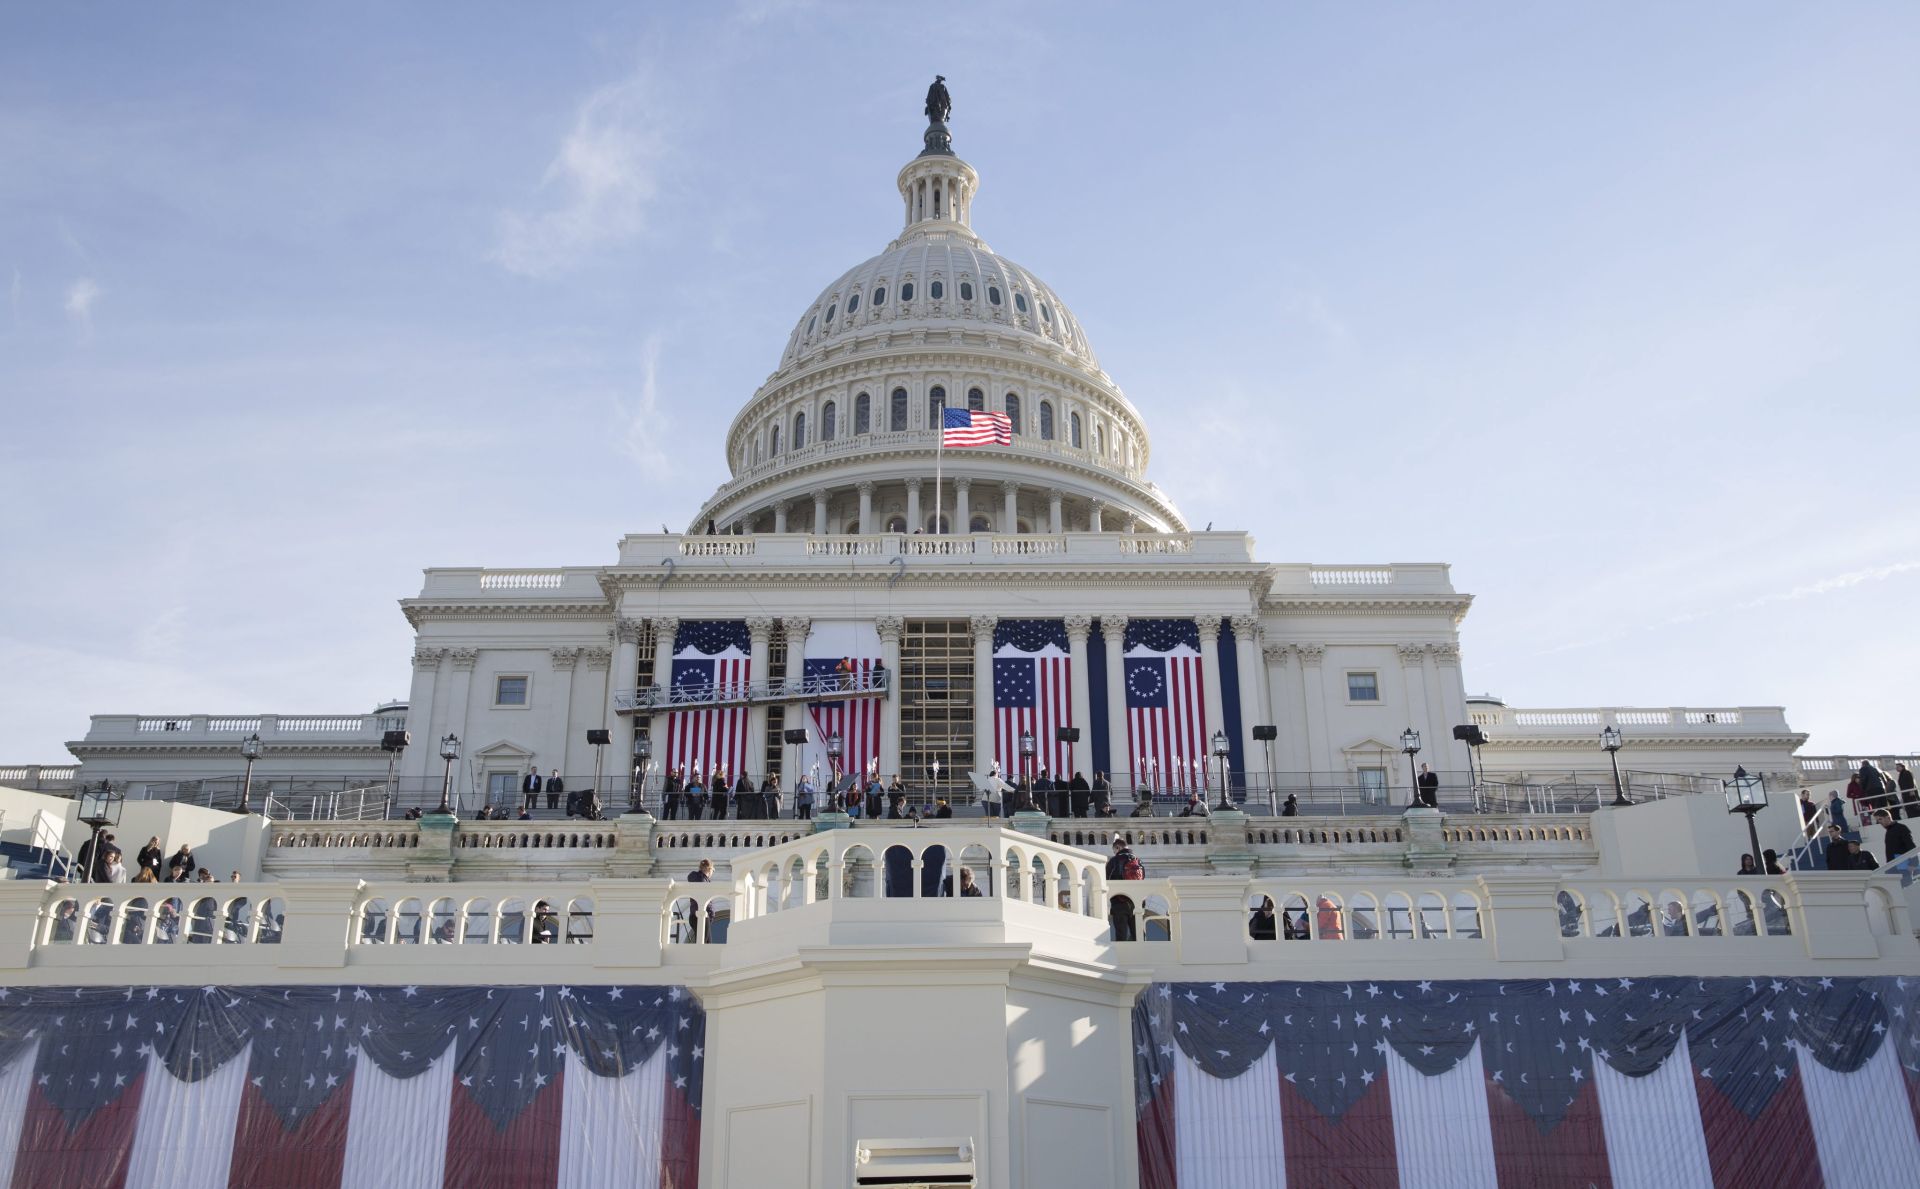 epa05719510 A general view of the West Front of the US Capitol during a dress rehearsal for the 58th Presidential Inauguration, in Washington, DC, USA, 15 January 2017. Donald Trump will be sworn-in as the 45th President of the United States during an Inauguration ceremony on the West Front of the US Capitol, 20 January 2017.  EPA/MICHAEL REYNOLDS